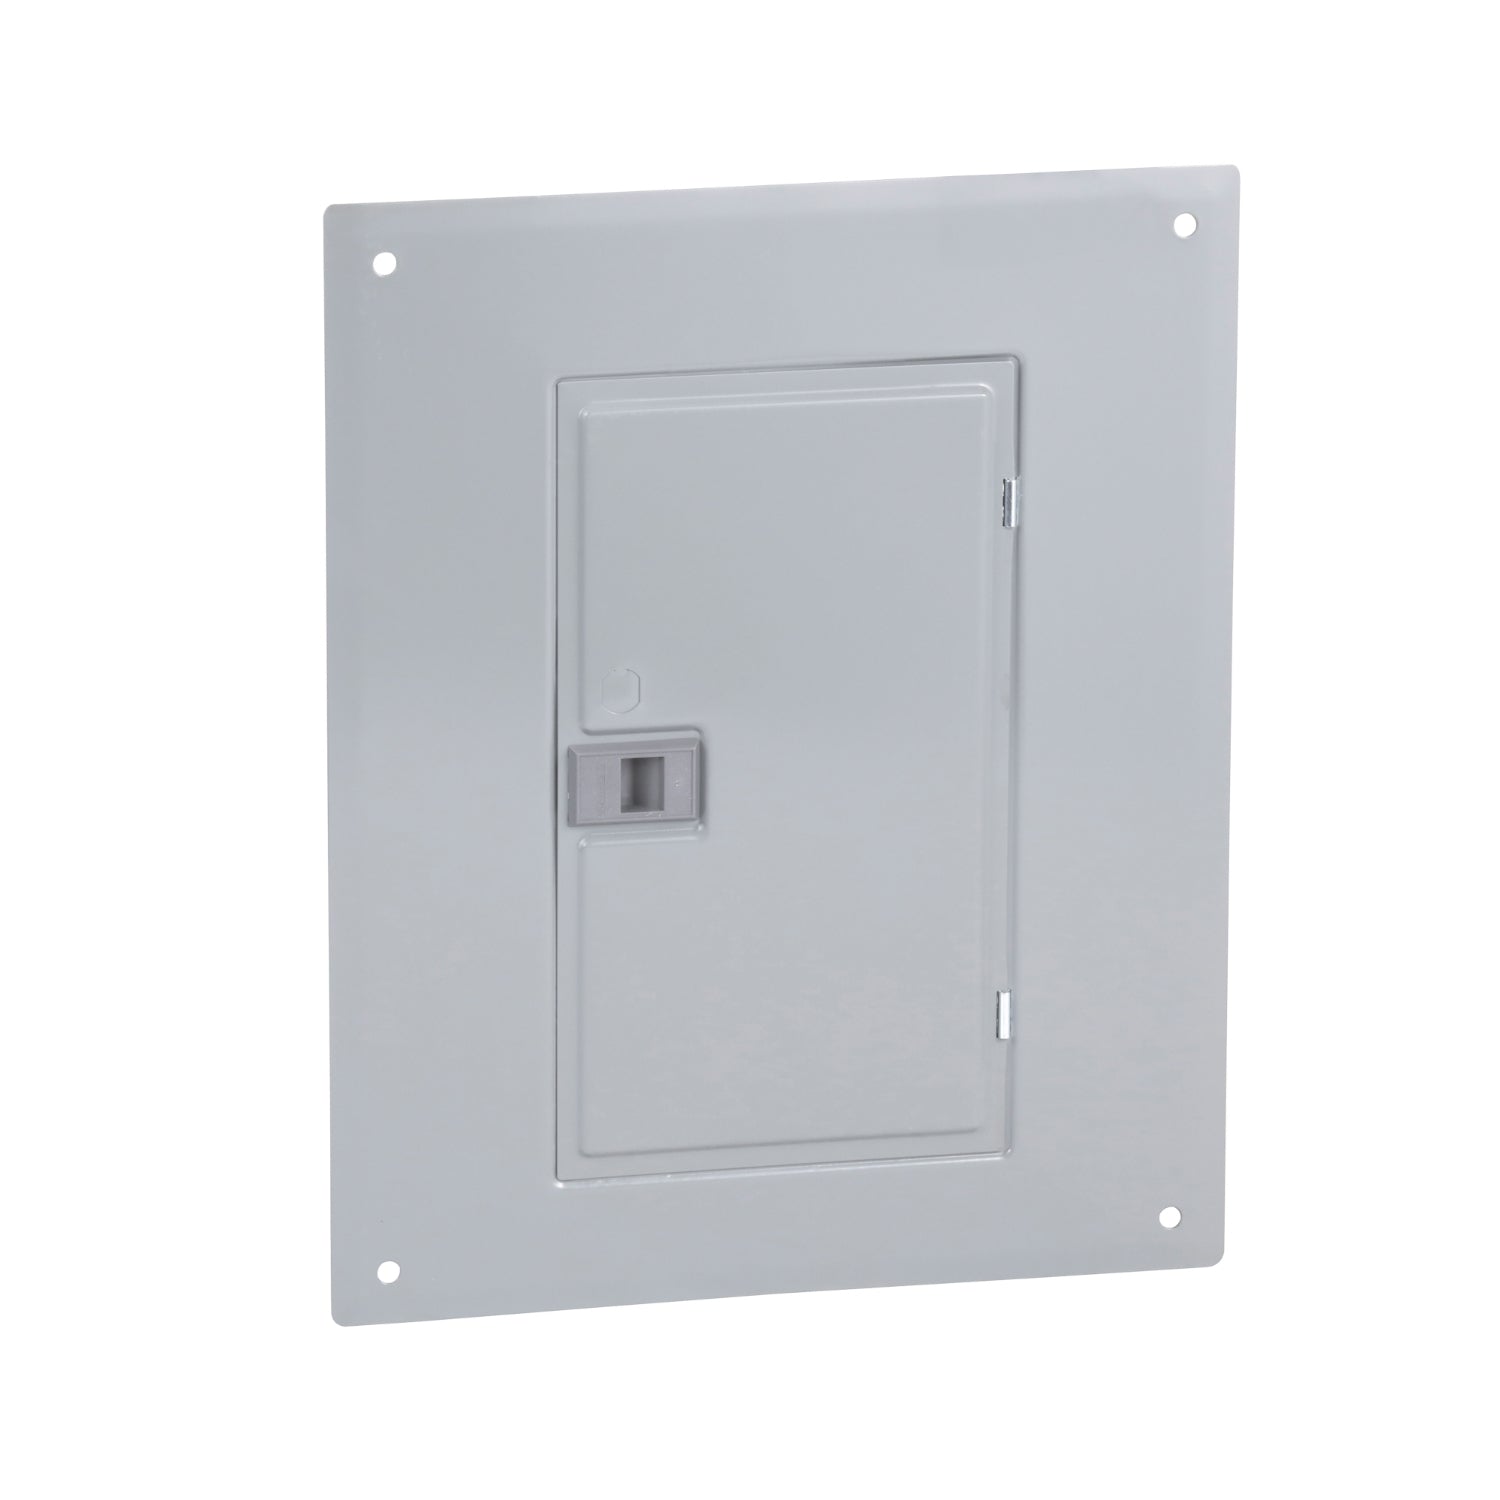 Circuit Panel Covers - Multiple Sizes